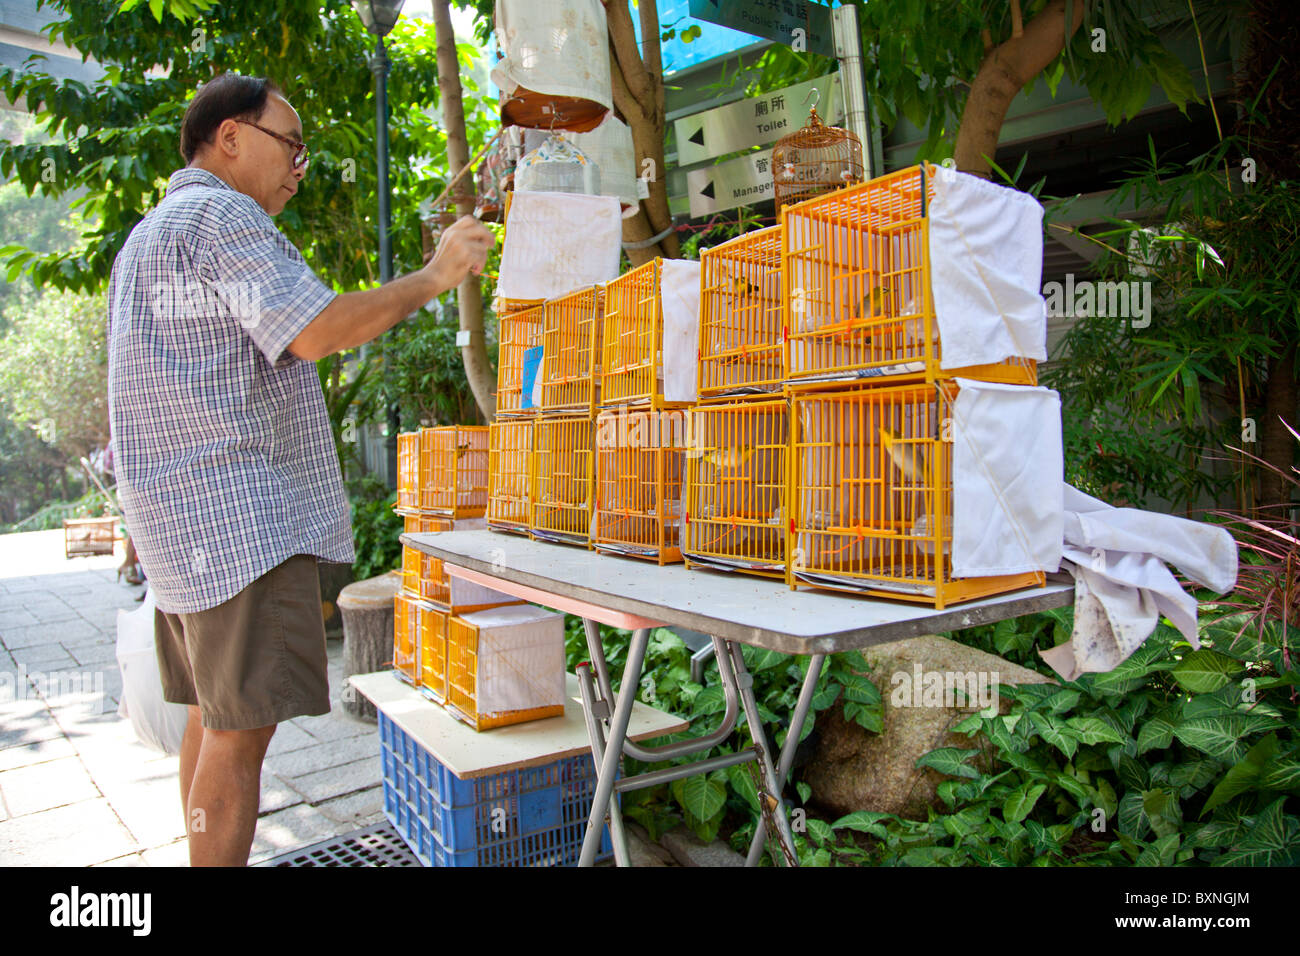 Kowloon, Hong Kong bird garden on Yuen Po Street, see the birds caged ready for sale or show Stock Photo